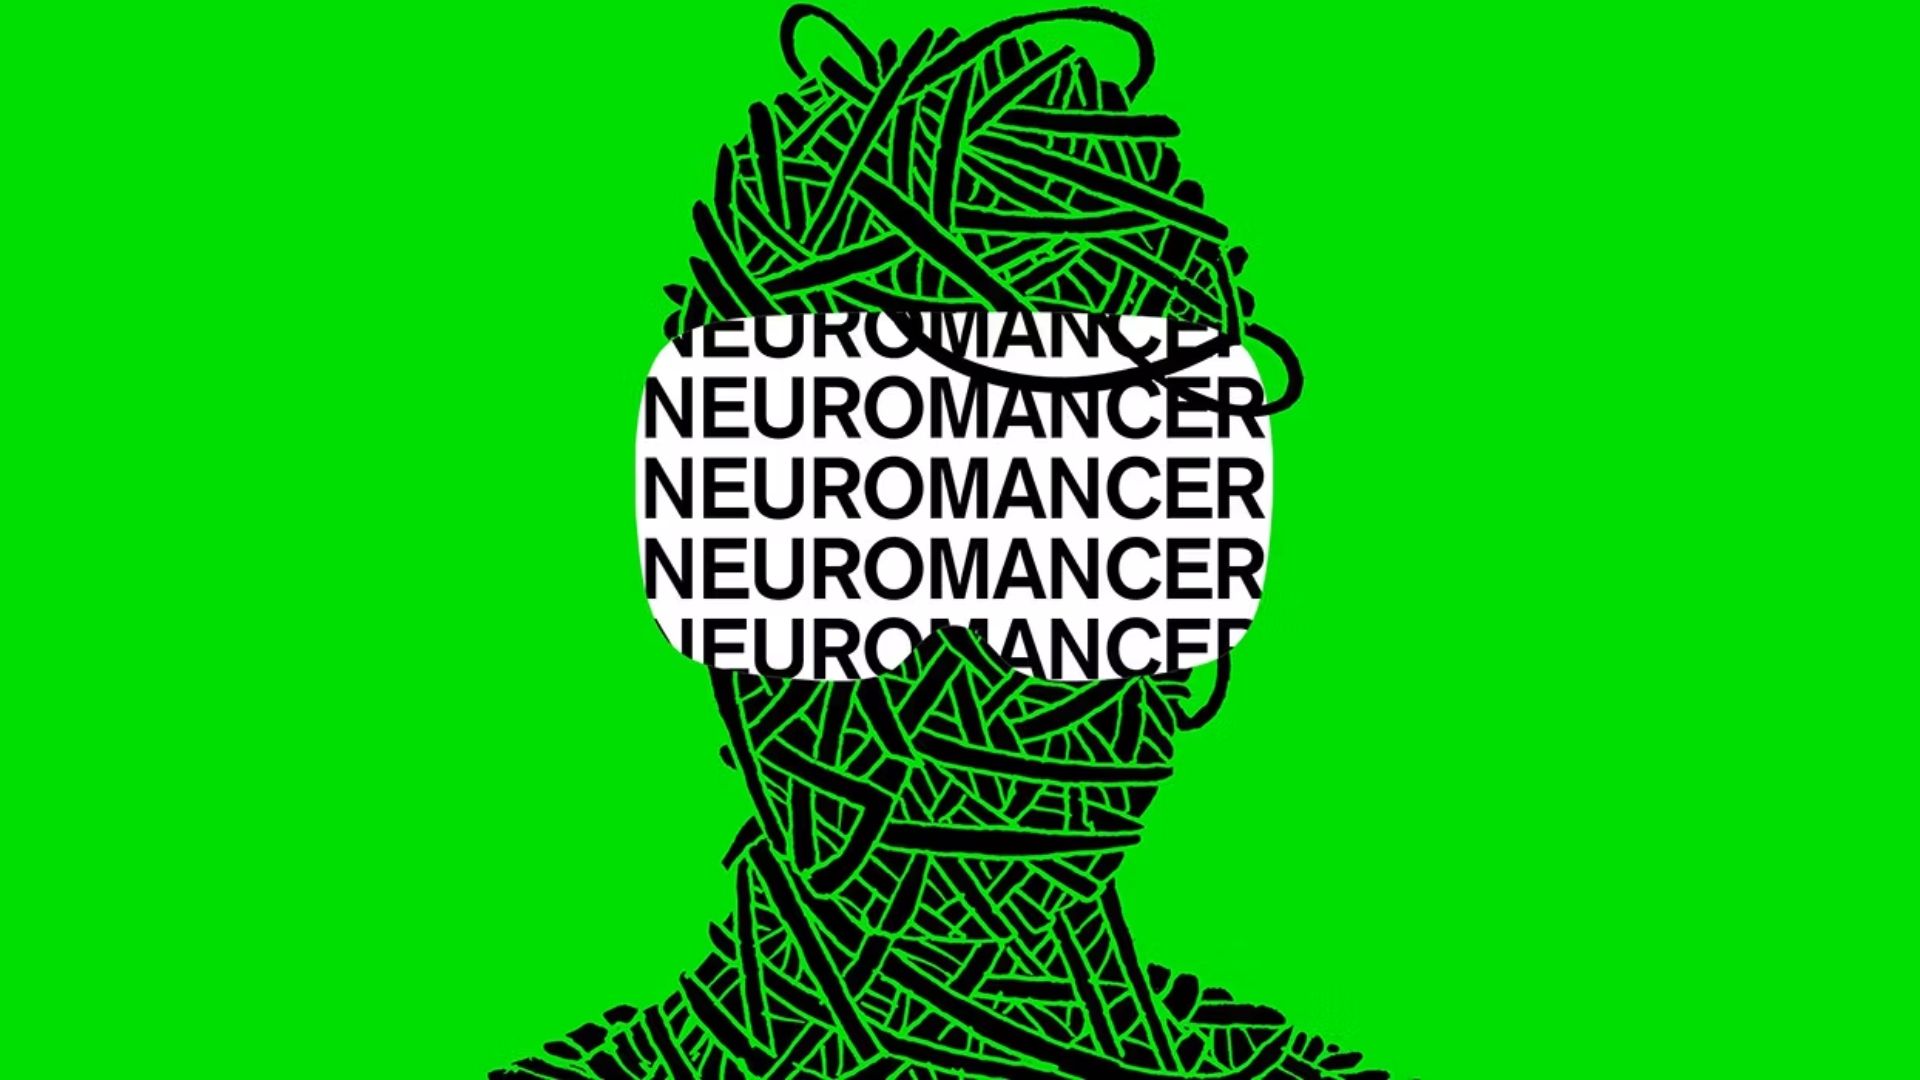 Close up of book cover of Neuromancer by William Gibson featuring a green background and the title in the center of a face